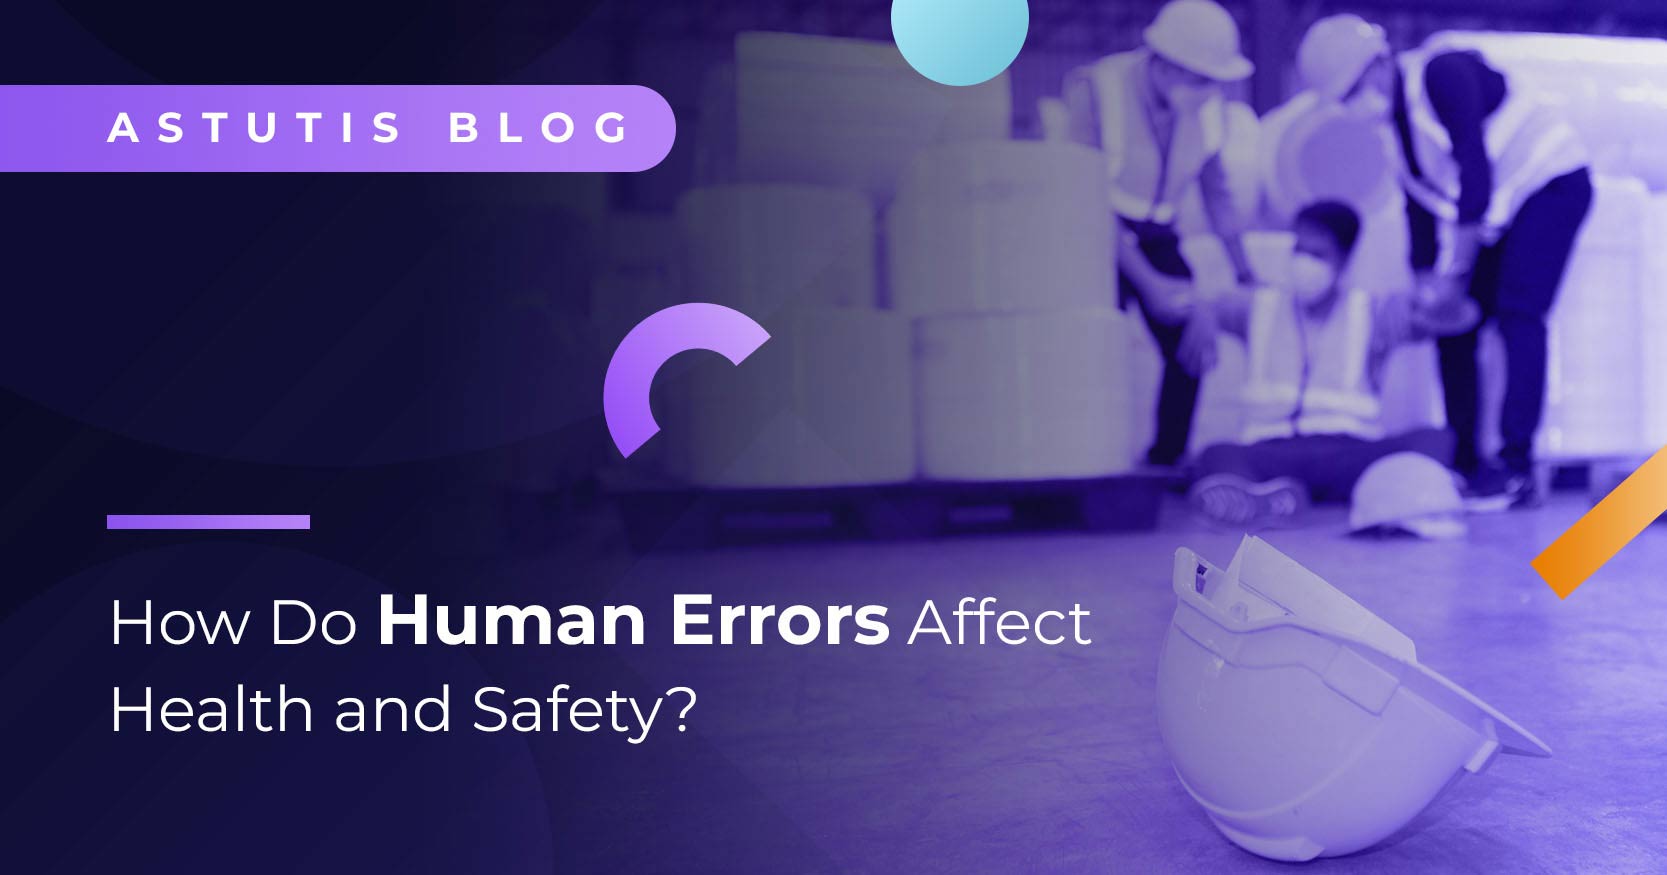 How Do Human Errors Affect Health and Safety?  Image